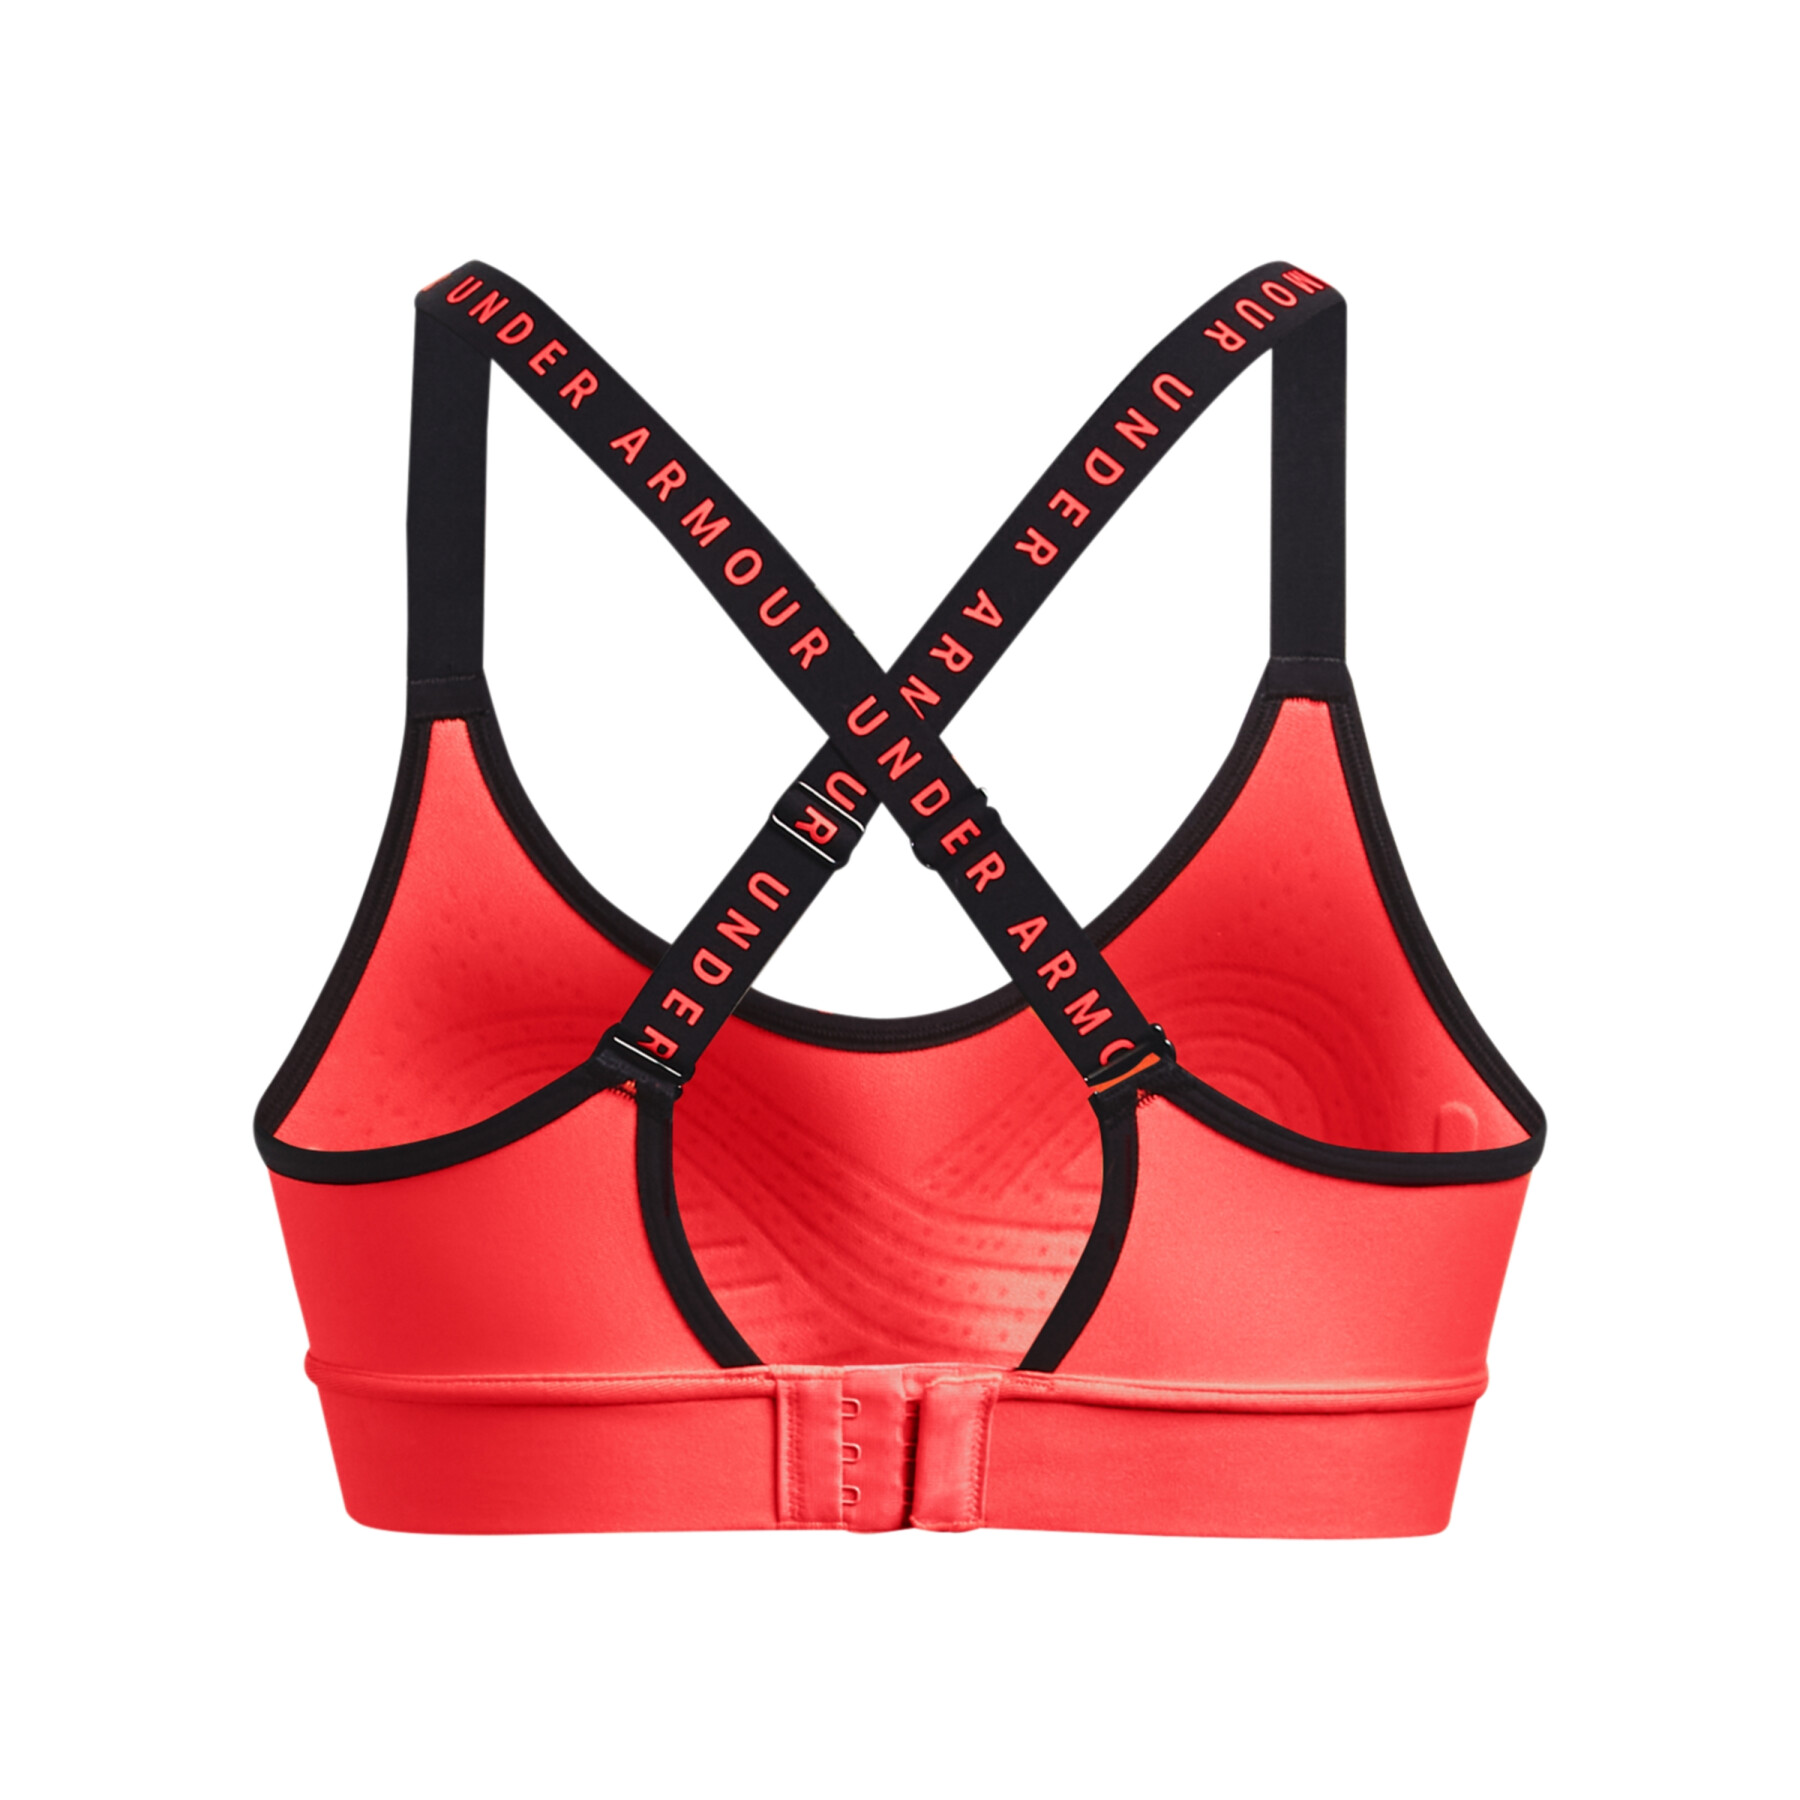 Moderate support bra for women Under Armour Infinity Covered Impact